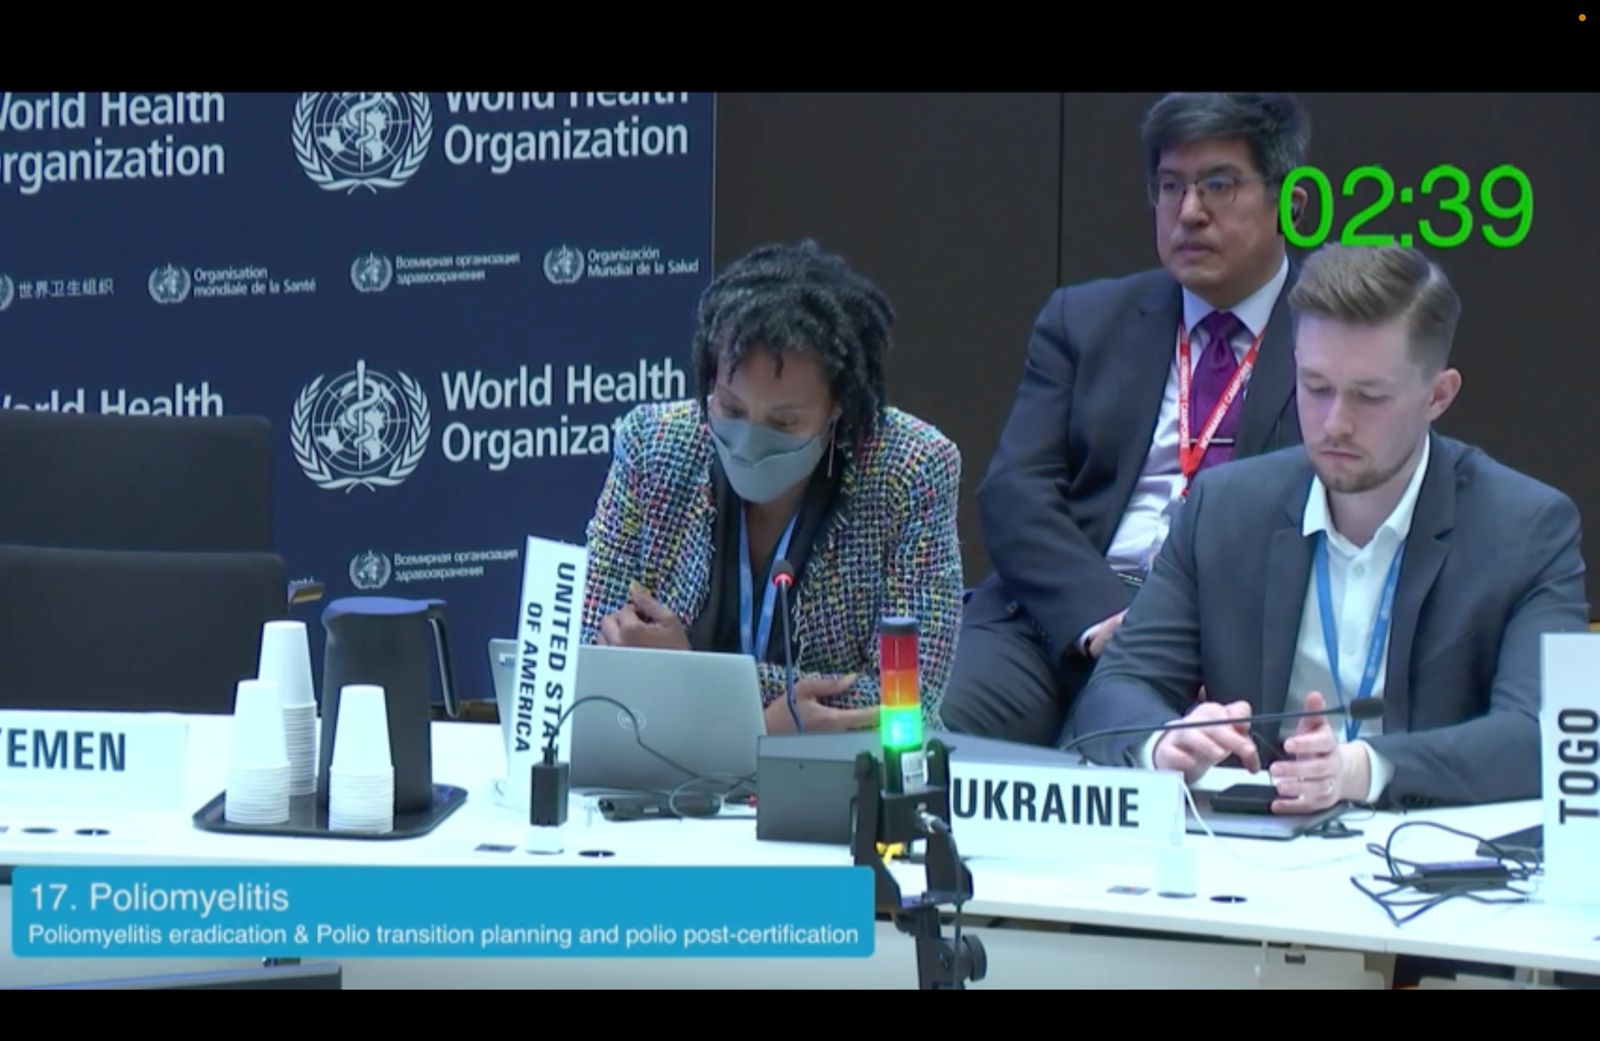 The United States speaks at the World Health Organizations Executive Board meeting in a session on eradicating poliomyelitis.